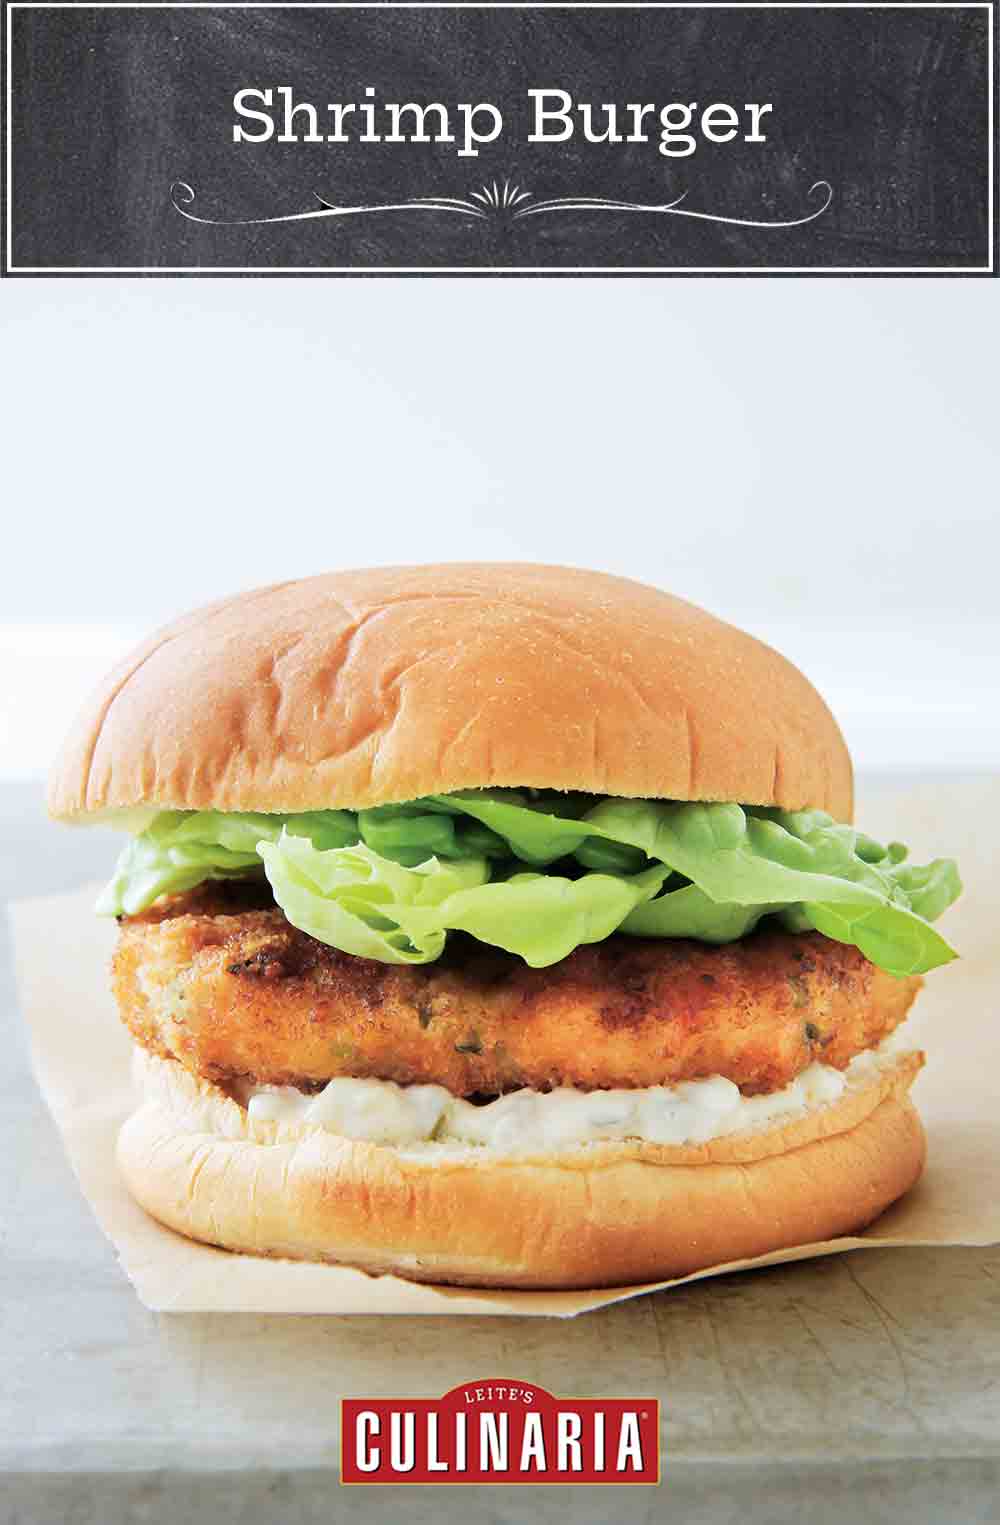 A shrimp burger with tartar sauce, topped with lettuce in a white bun on a piece of parchment paper.